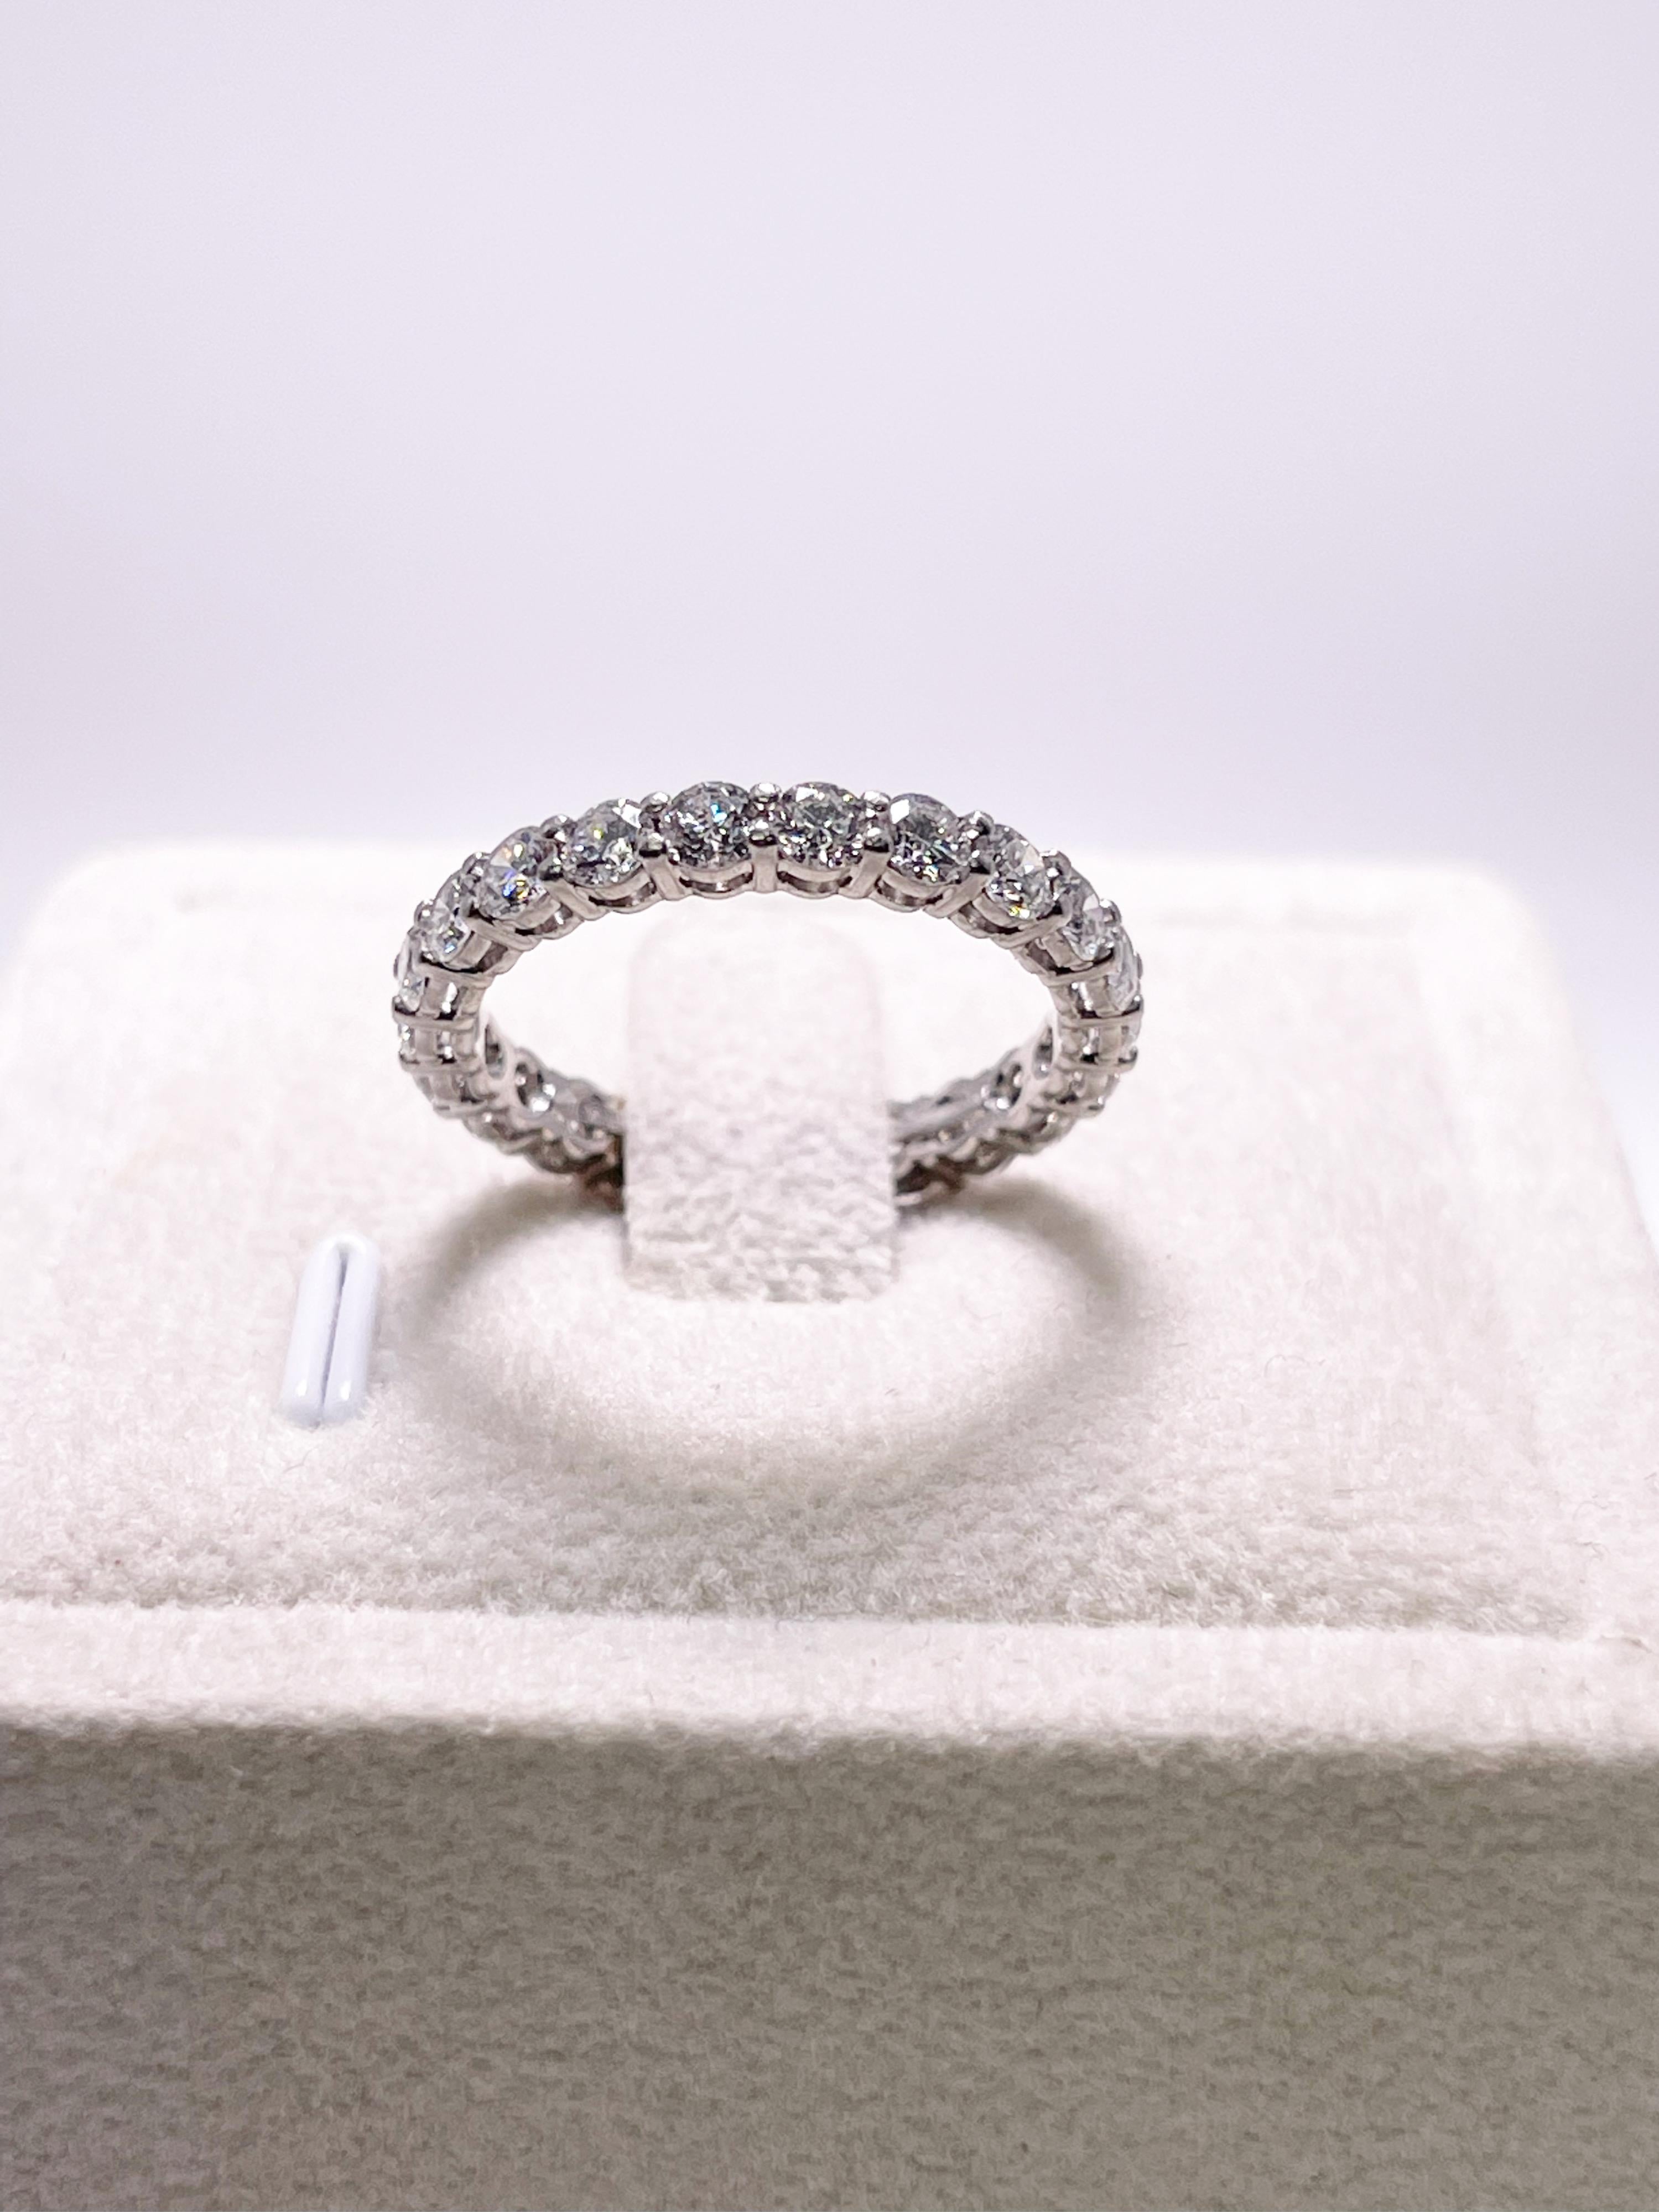 Charming eternity ring by Tiffany & Co. 
This magnificent Tiffany Embrace is made in platinum with VVS diamonds.
Comes with original dust bag and box.
GRAM WEIGHT: 3.34gr
METAL: platinum

NATURAL DIAMOND(S)
Cut: Round Brilliant
Color: E-F 
Clarity: